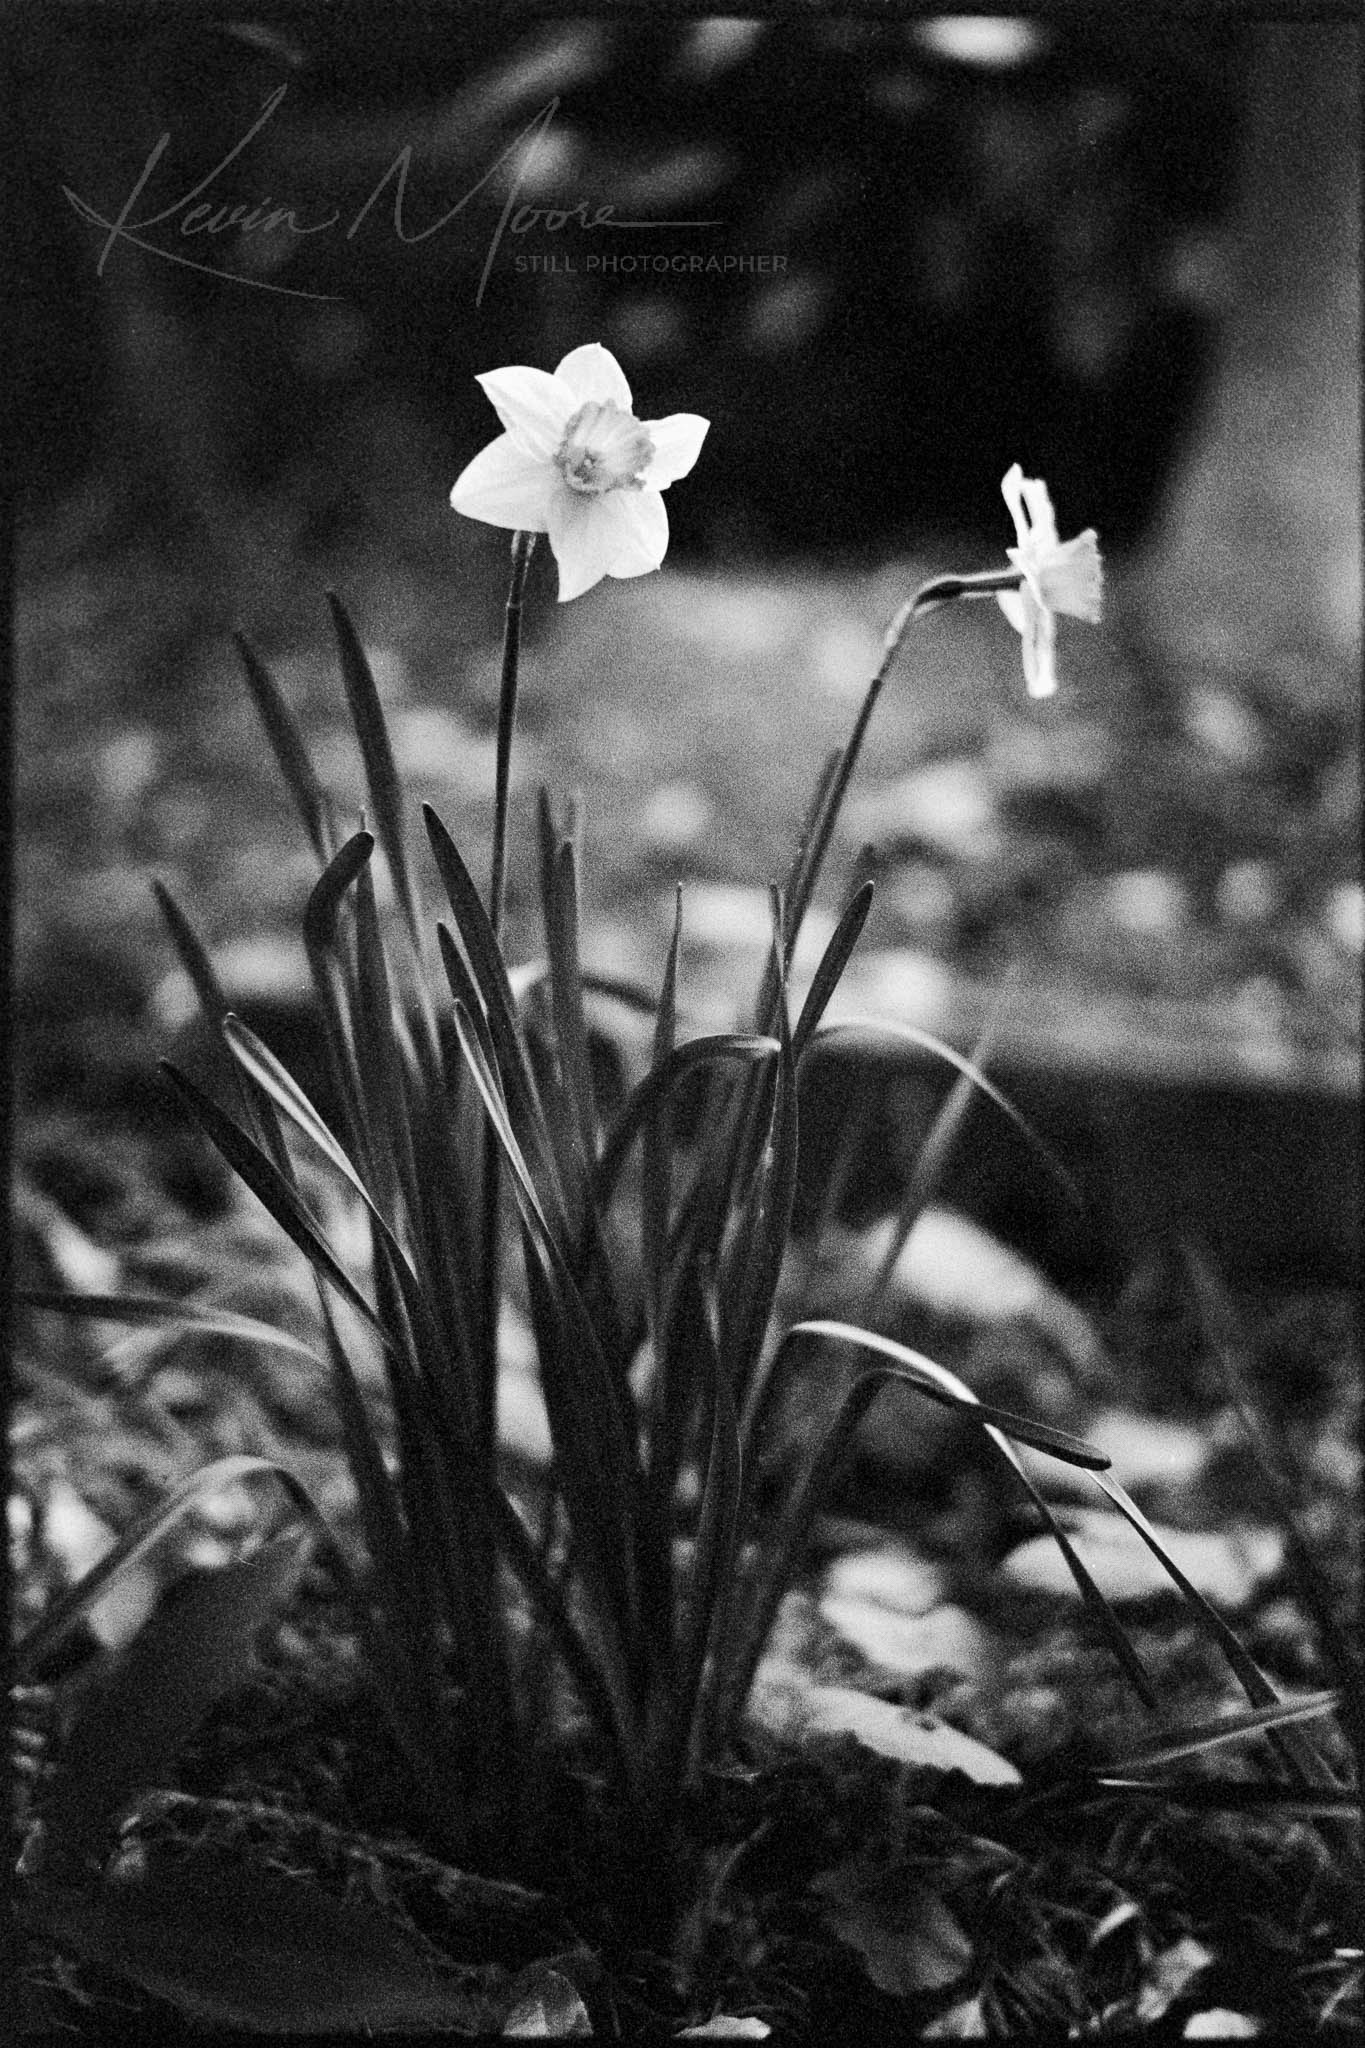 Black and white capture of blooming daffodils in a serene garden setting.